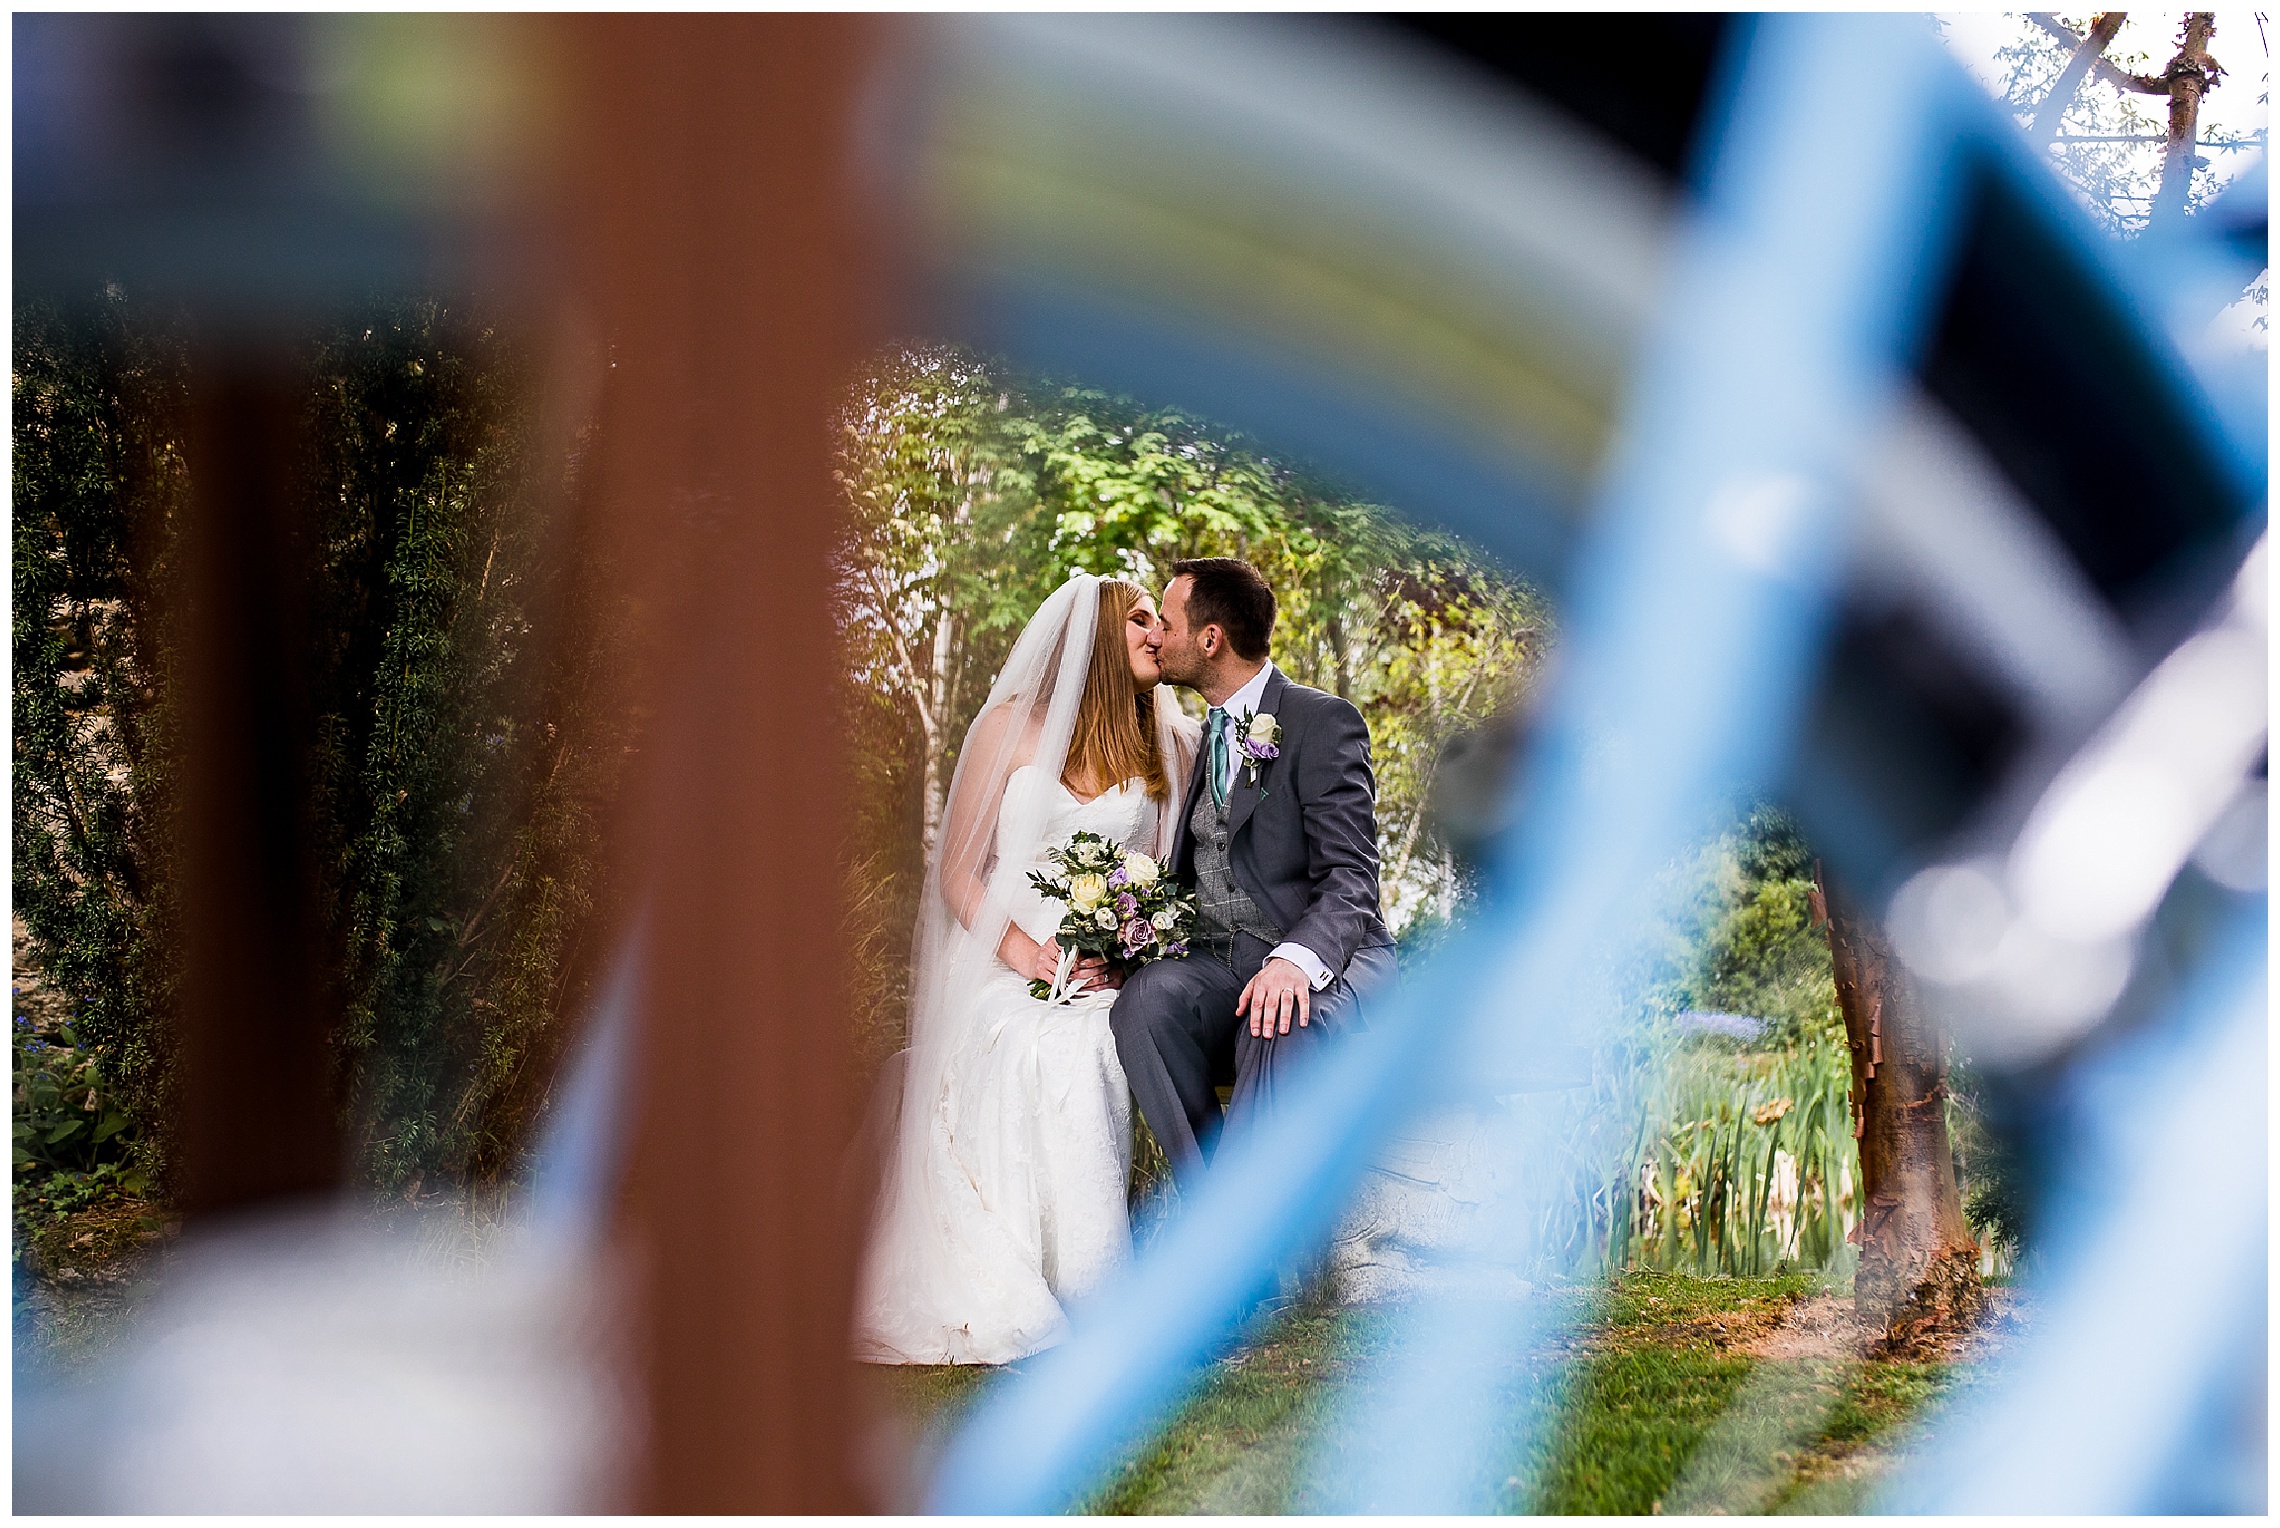 Bride and groom kiss privately surrounded by greenery and blue bike